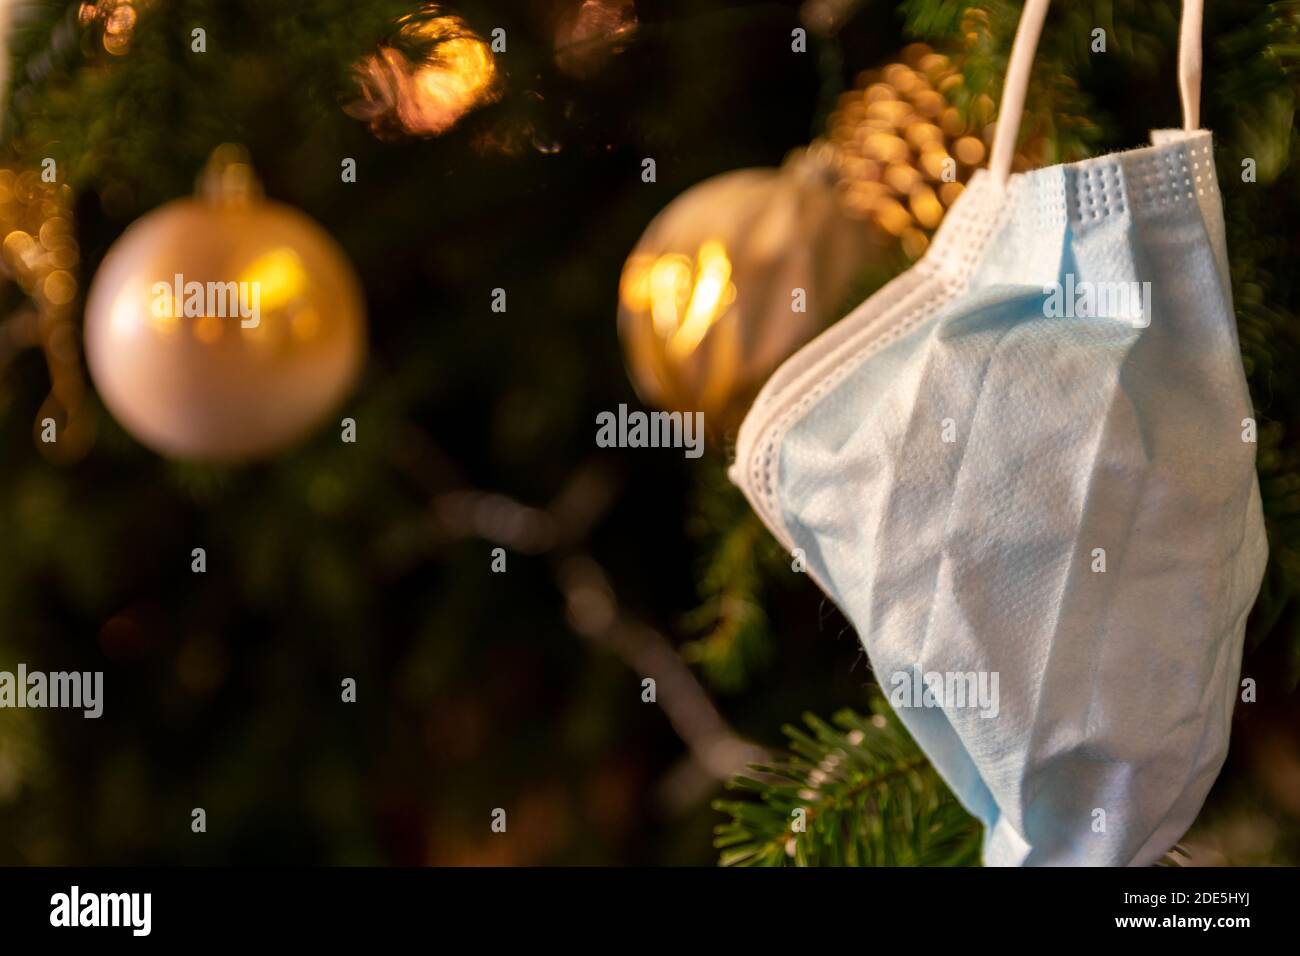 Special christmas tree in 2020 season decorated with face mask due to covid-19 corona pandamic restriction. Stock Photo